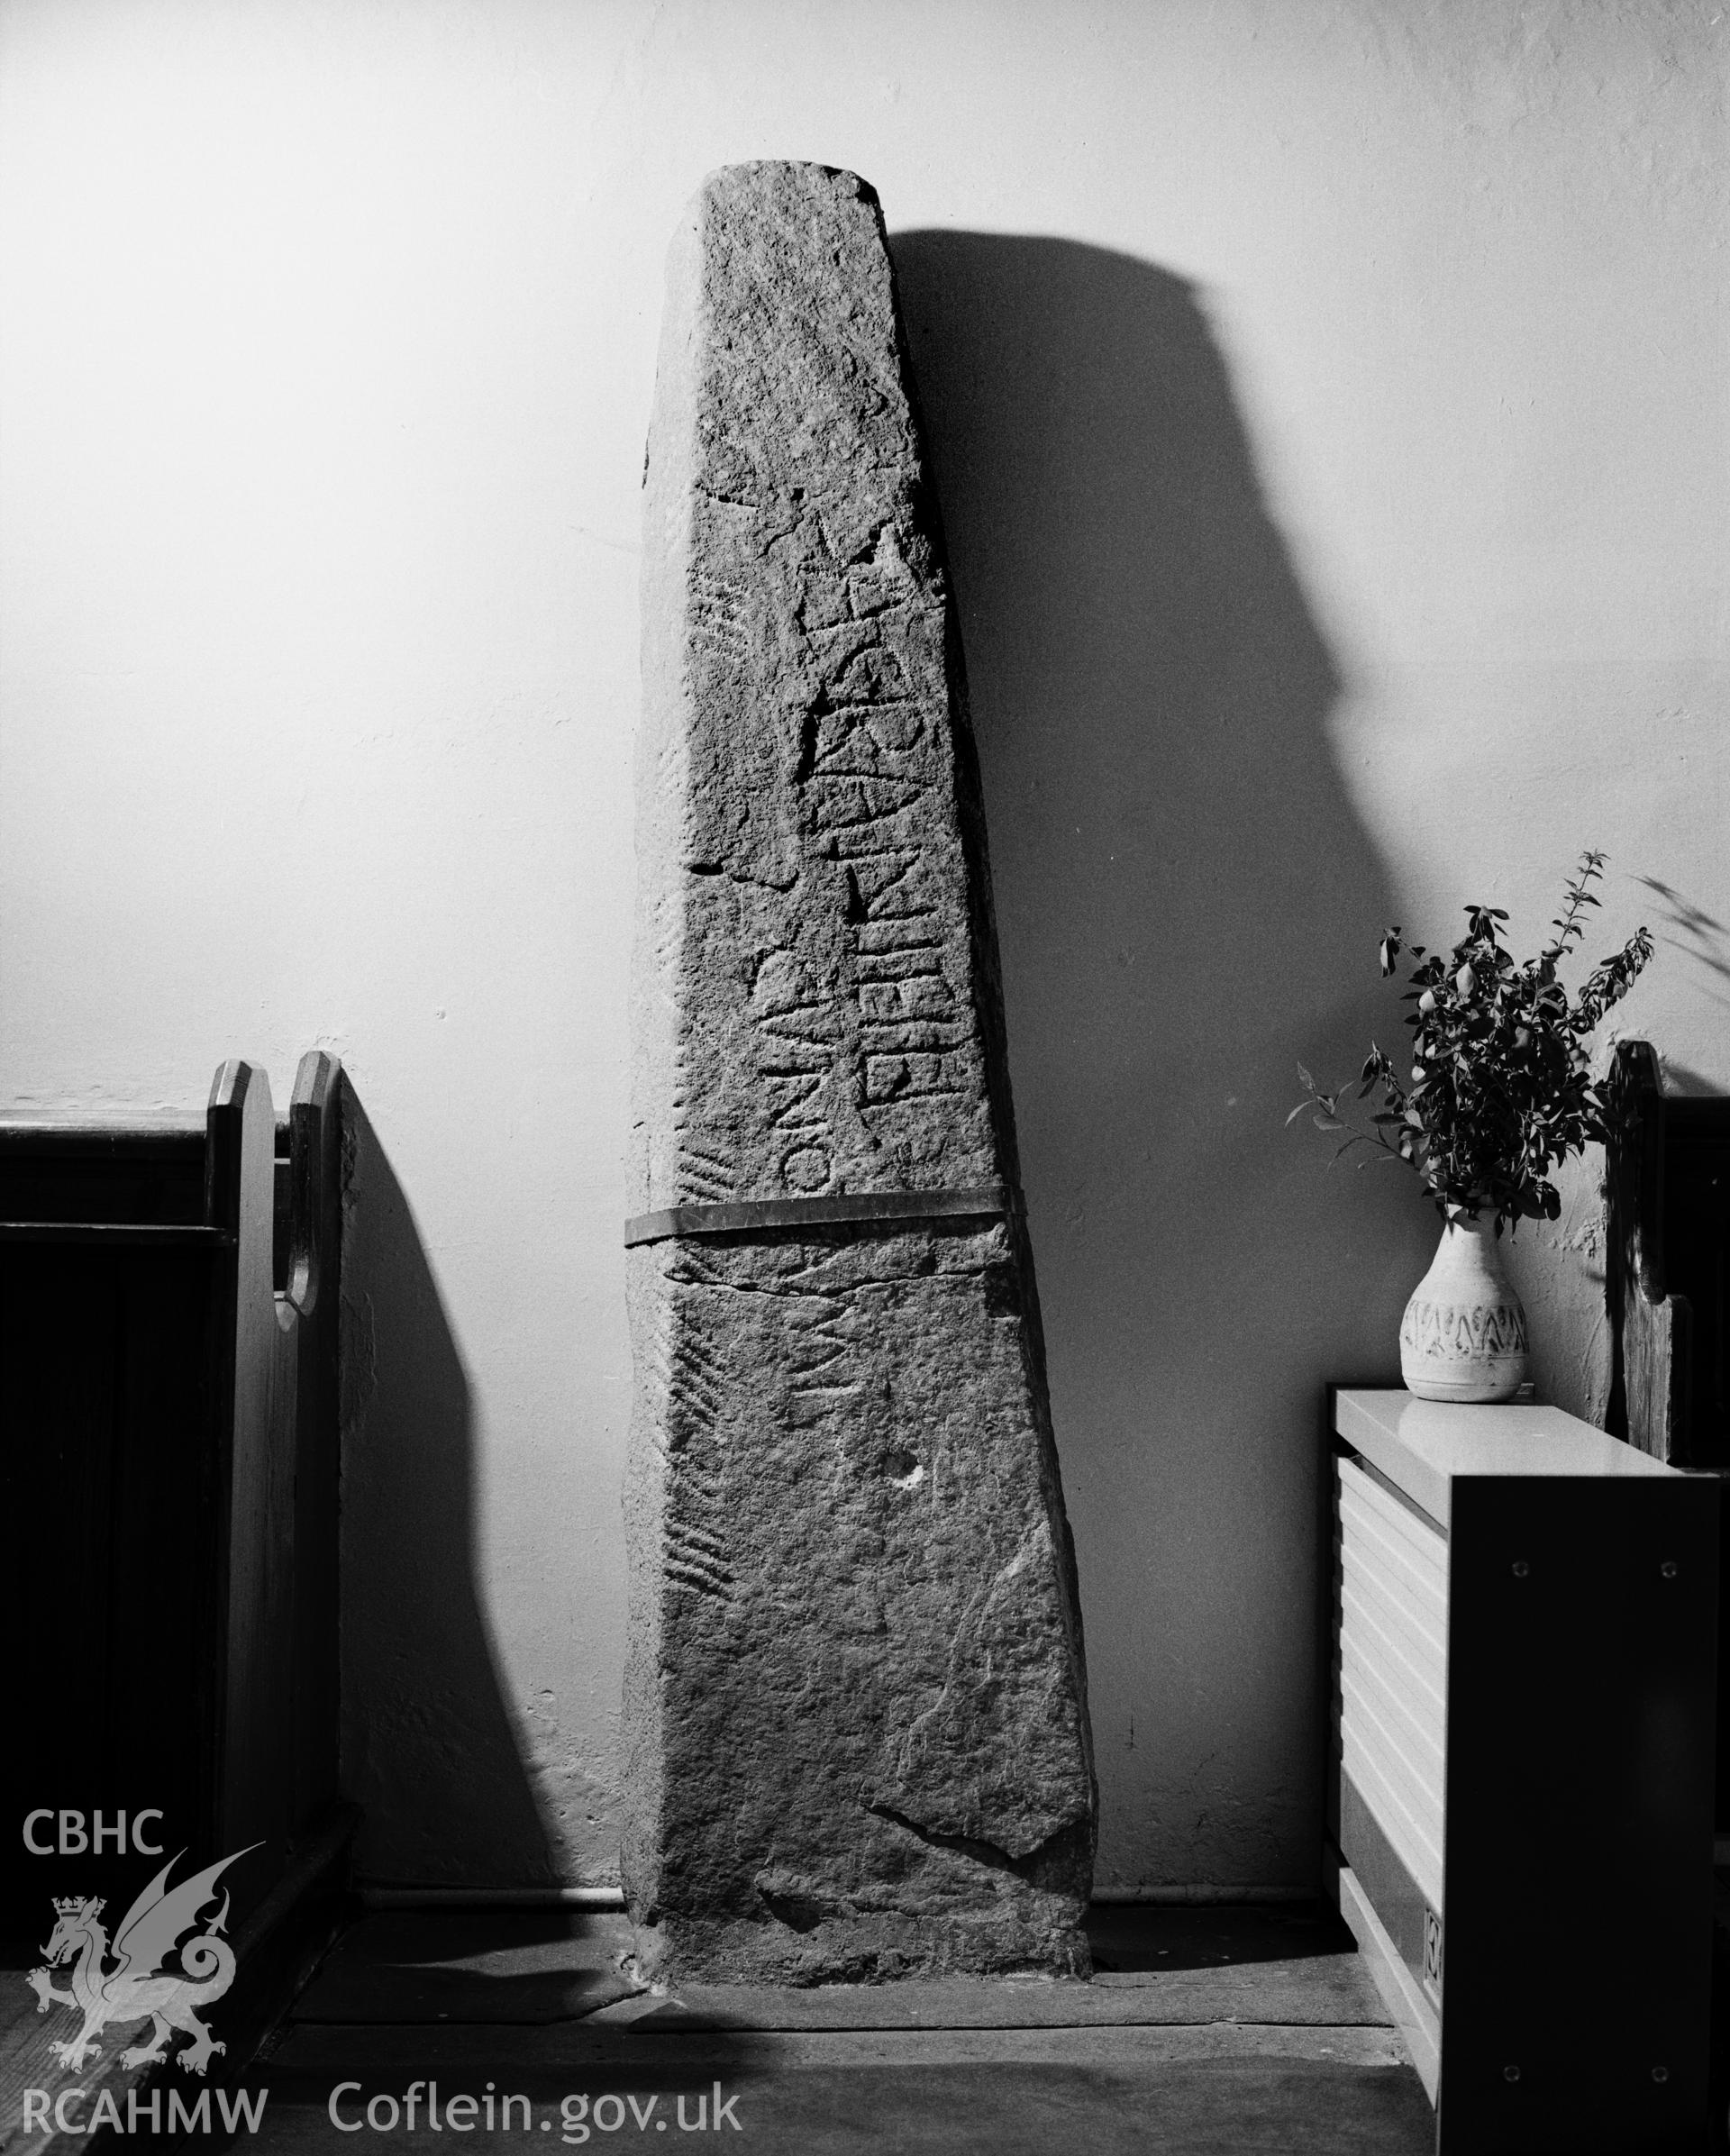 View of Early Christian Monument at St. Dogmael's Church.